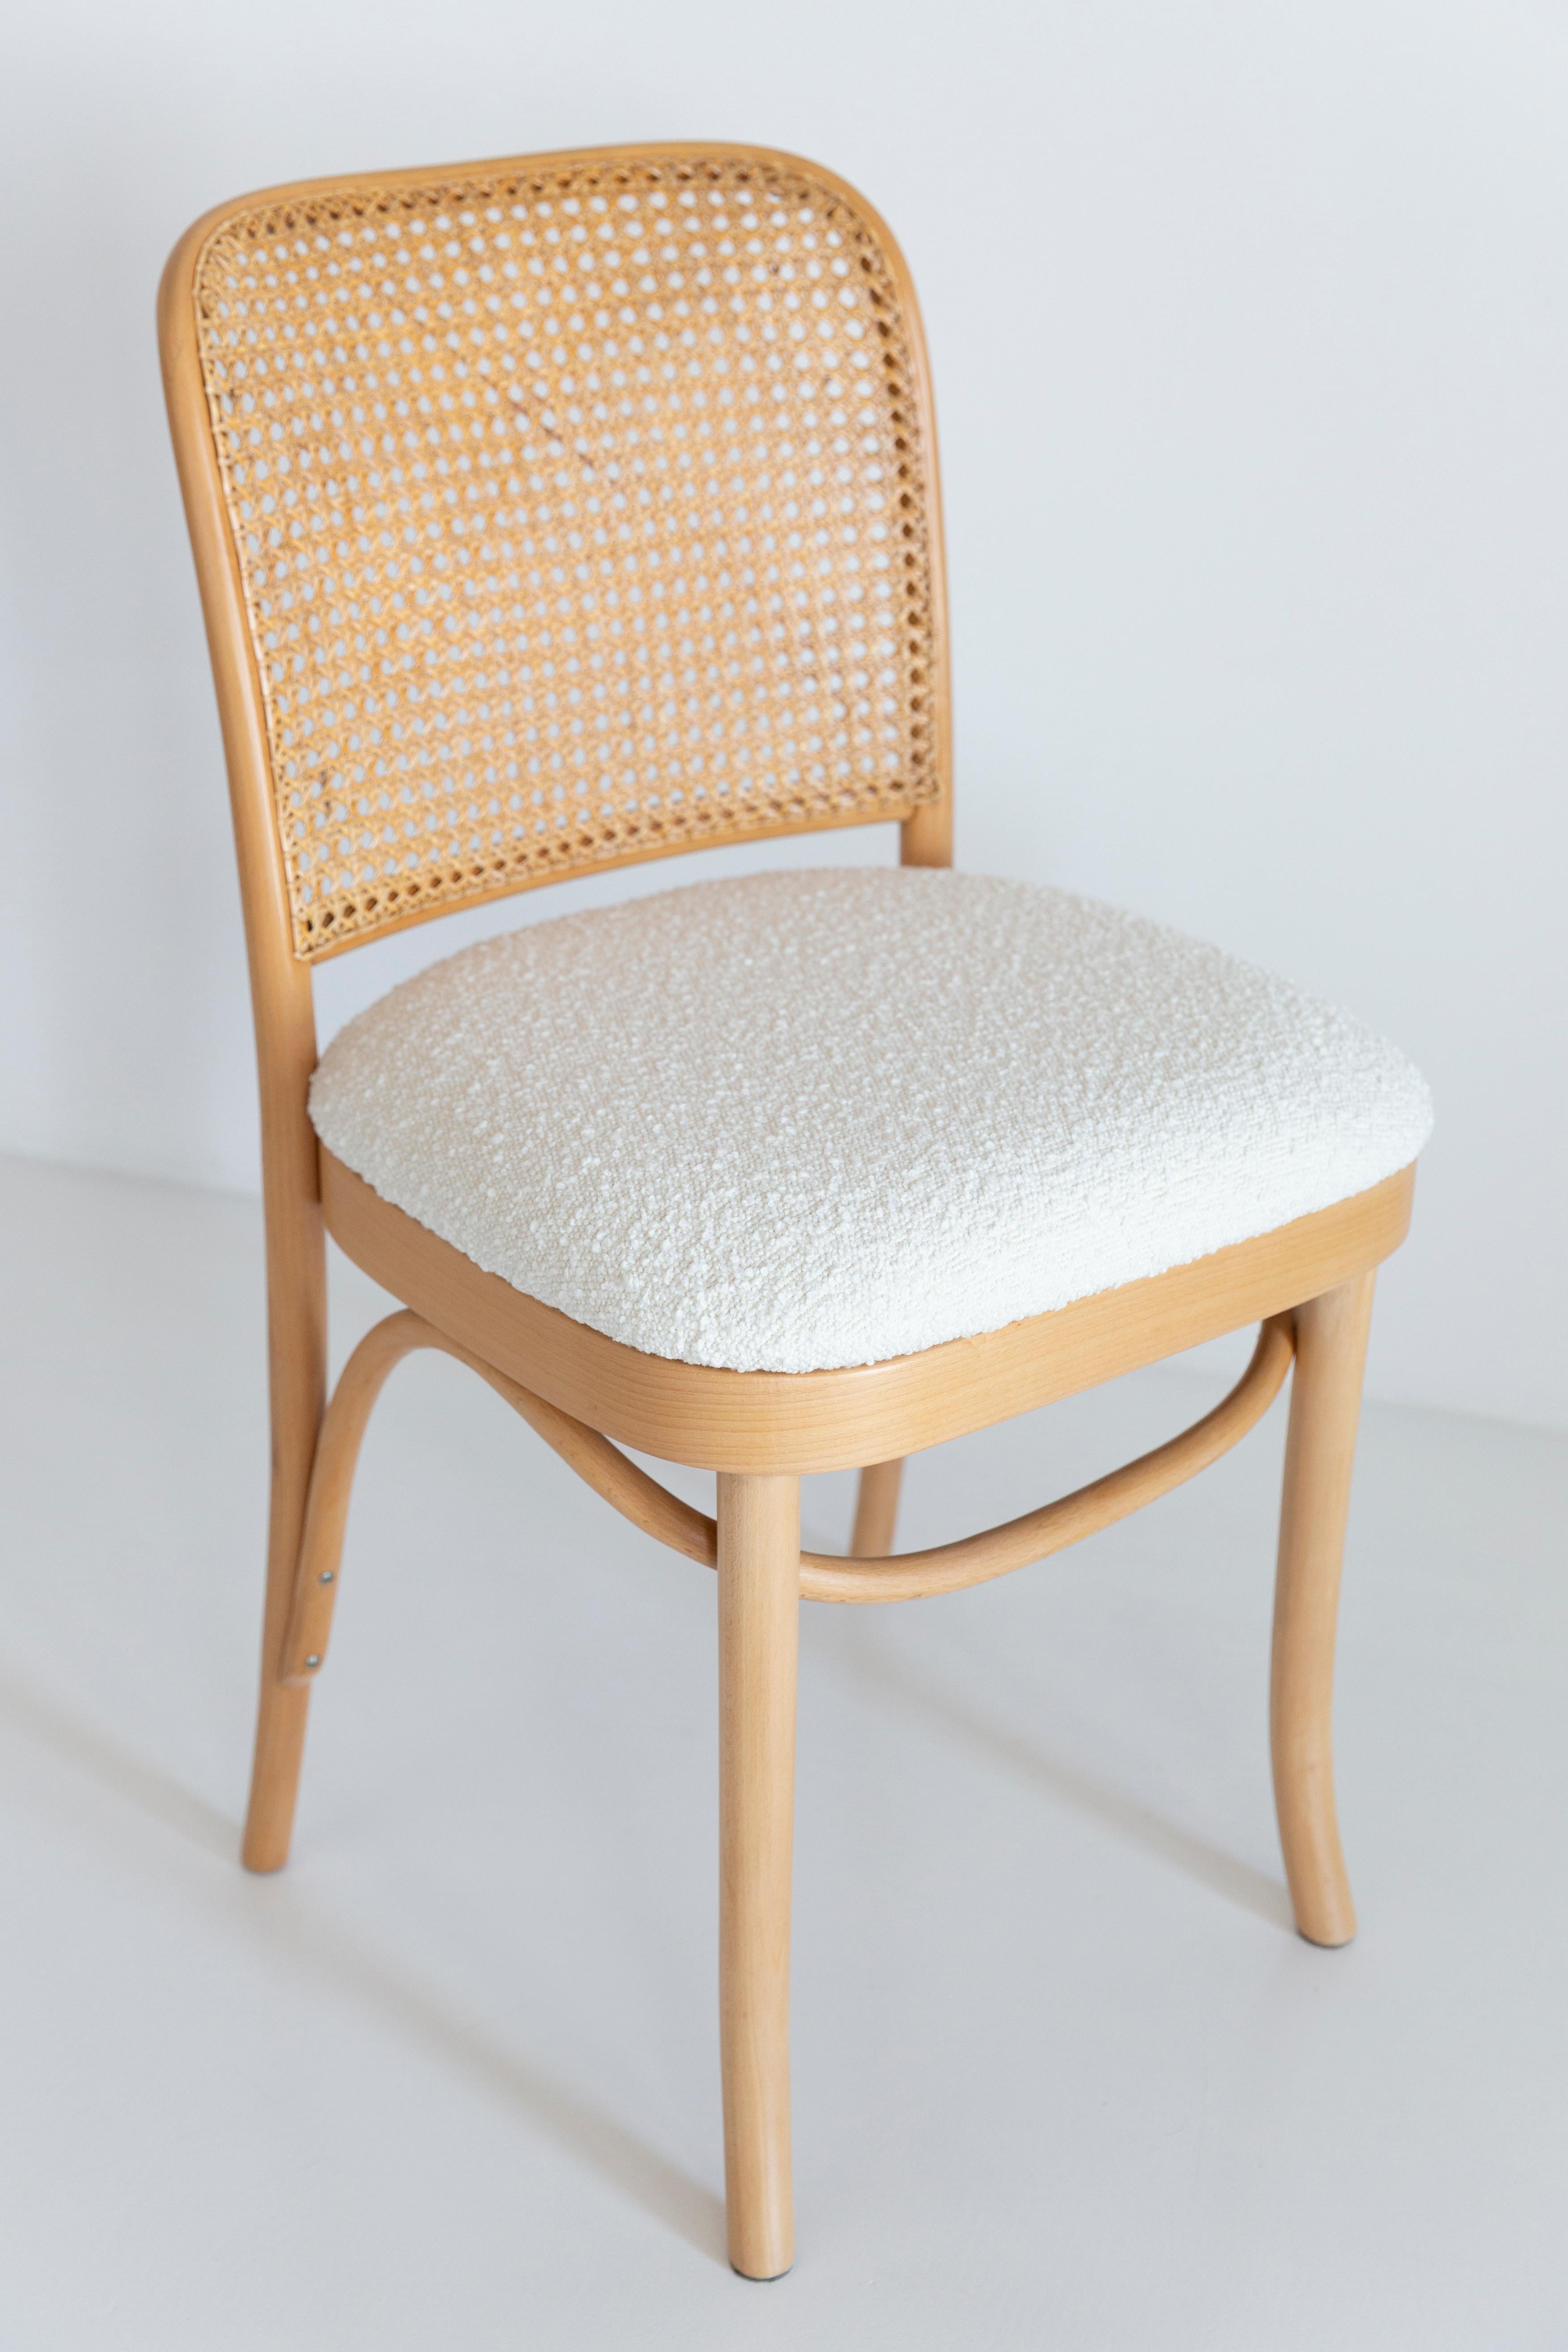 Light White Boucle Thonet Wood Rattan Chair, 1960s In Excellent Condition For Sale In 05-080 Hornowek, PL